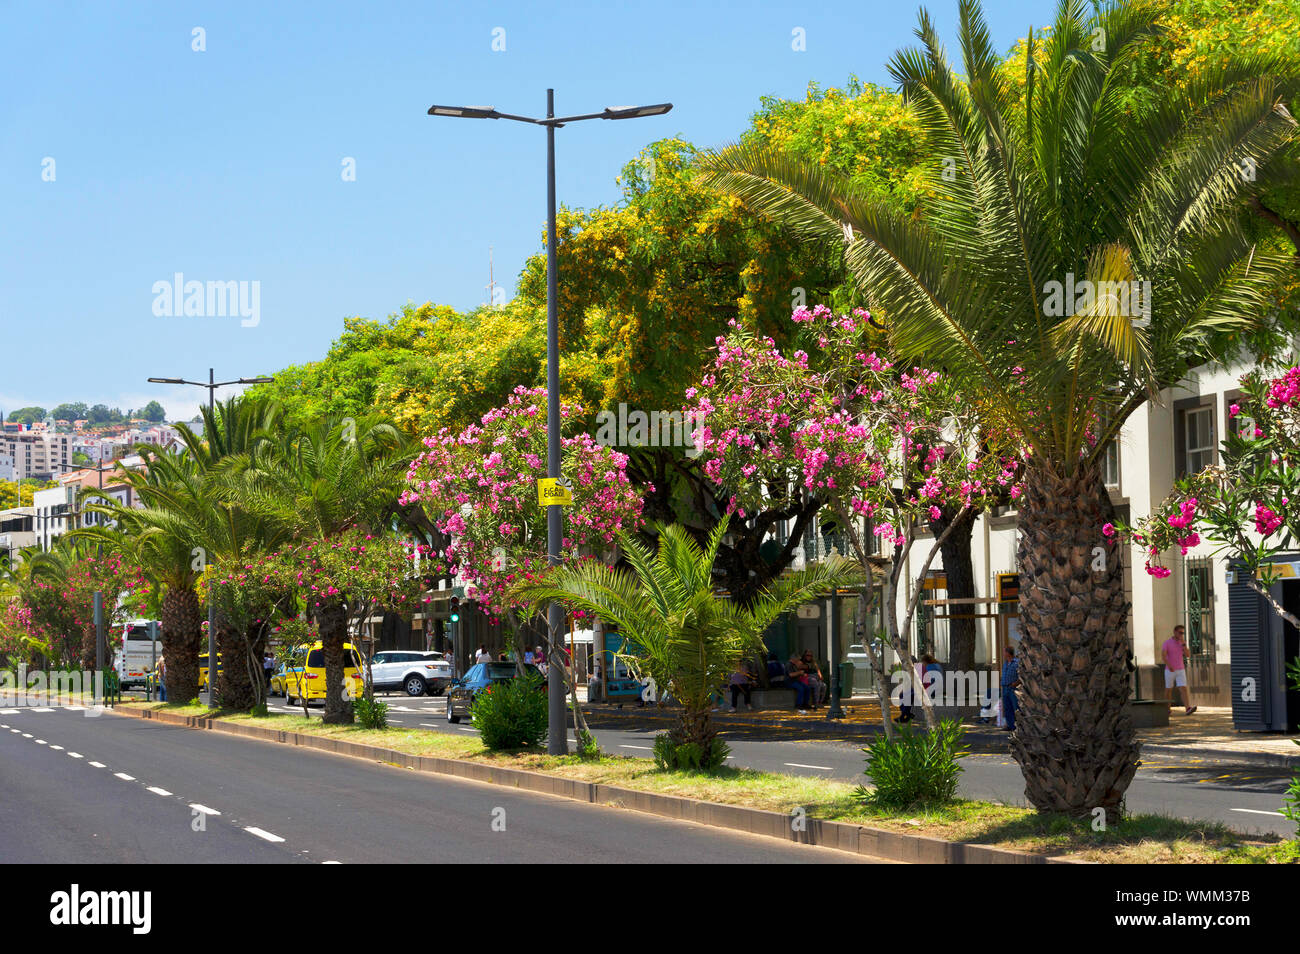 Plants On Dividing Line Amidst Road In City Against Sky Stock Photo